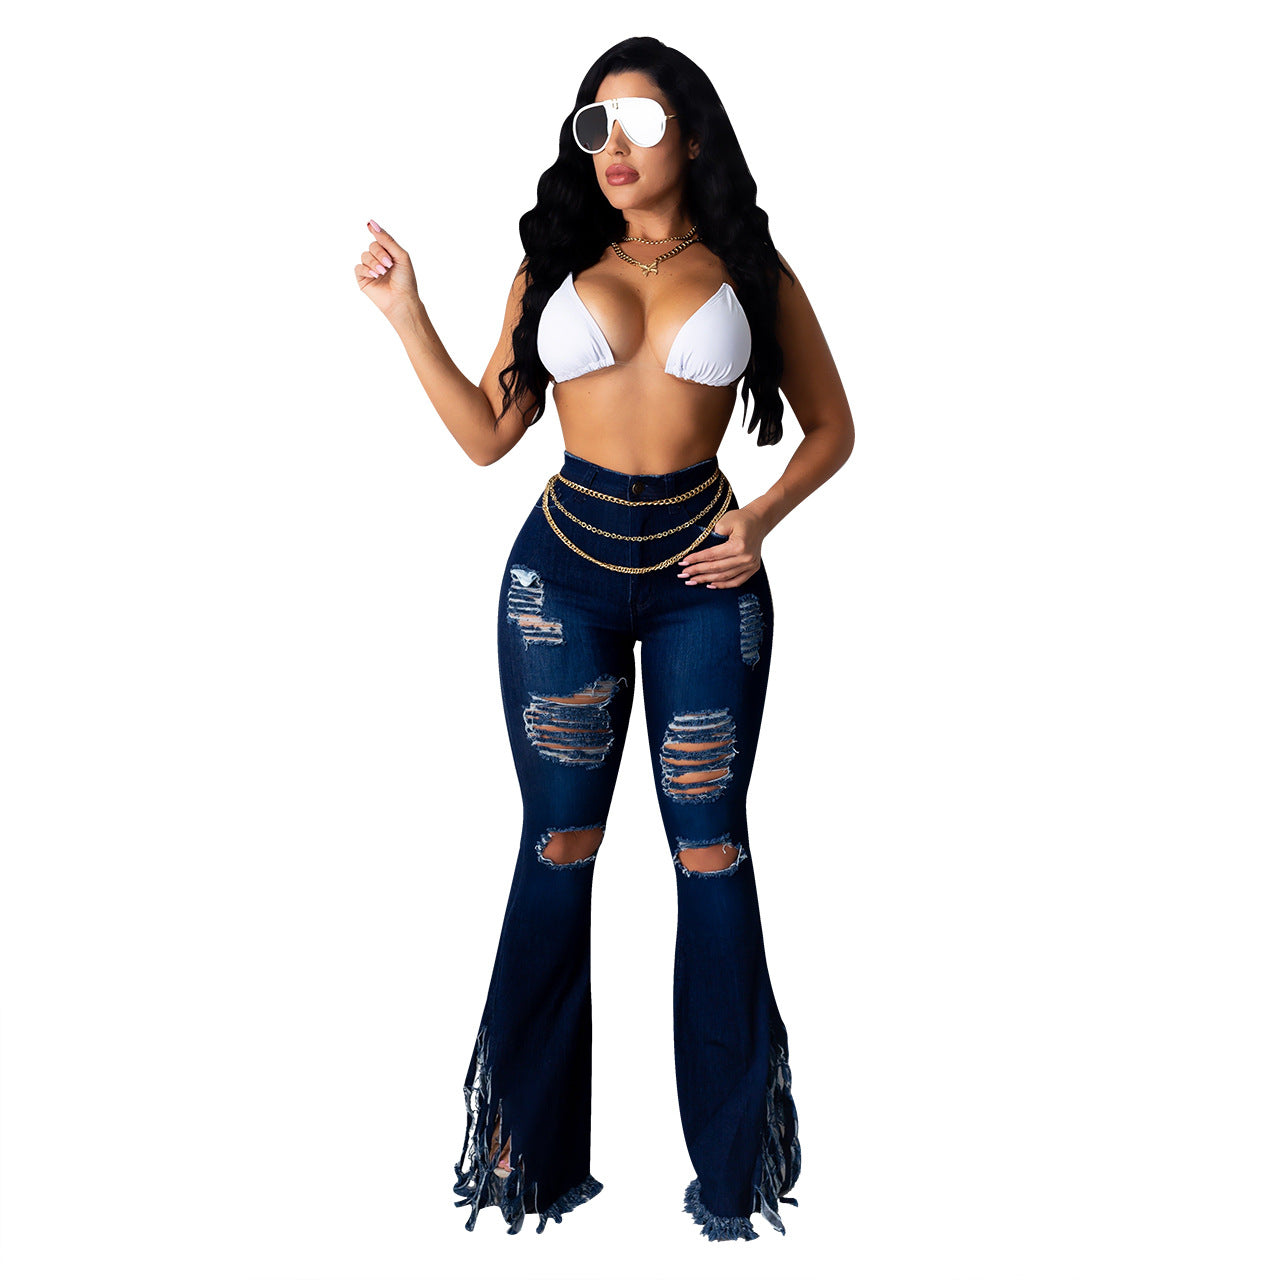 Women Women Clothing Ripped Tassel Washed Jeans Pants Only